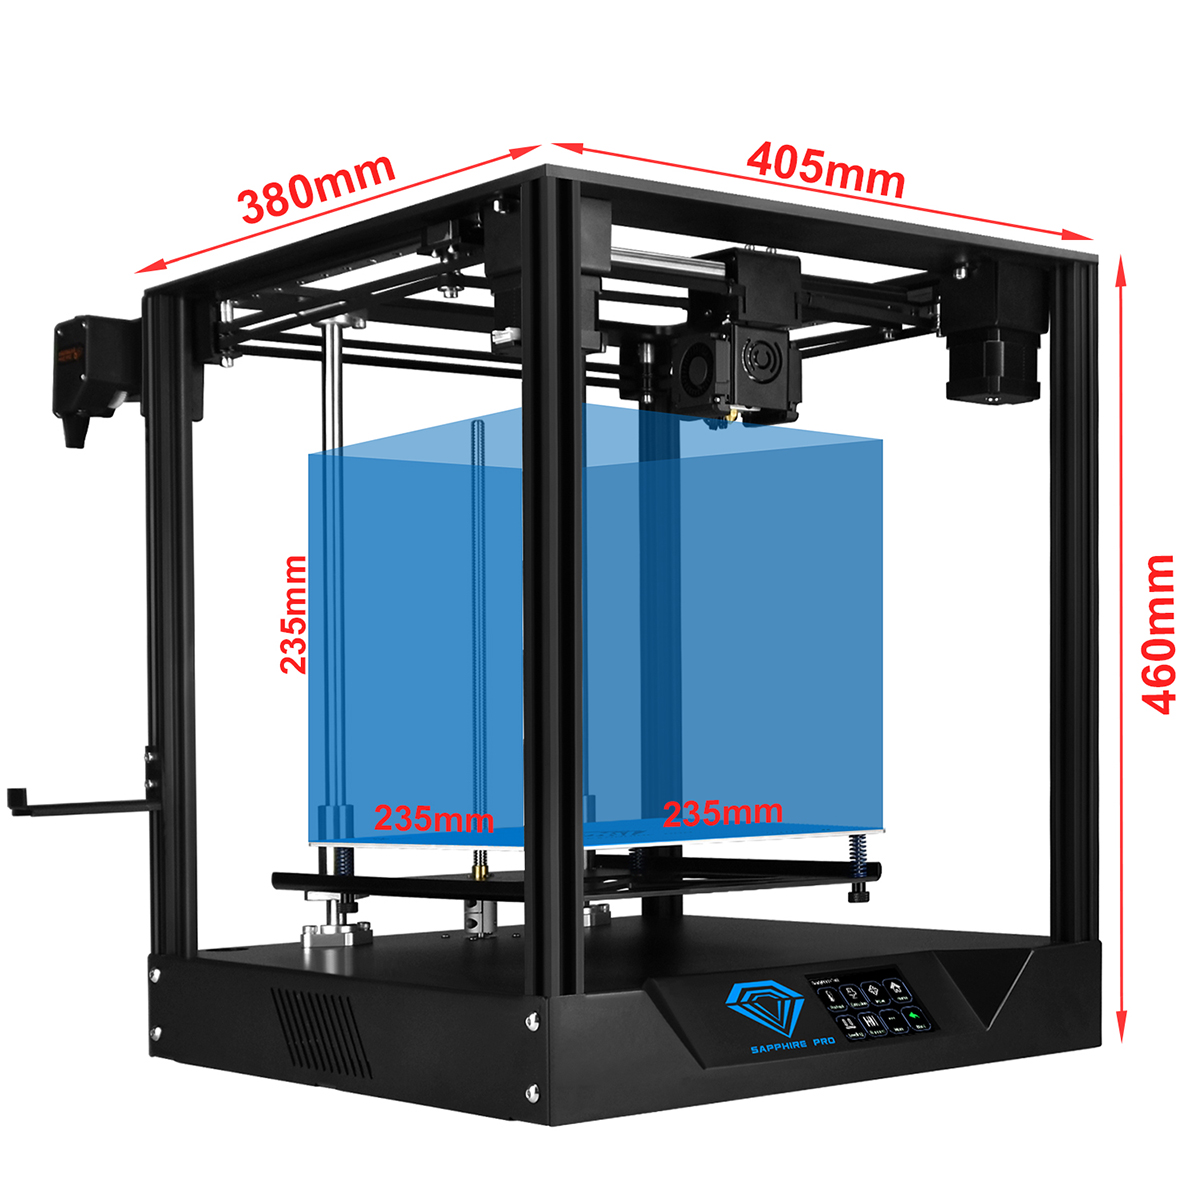 TWO TREES® Sapphire Pro CoreXY DIY 3D Printer Kit 235*235*235mm Printing Size With Dual Drive BMG Extruder / X-axis&Y-axis Linear Guide / Power Re 17